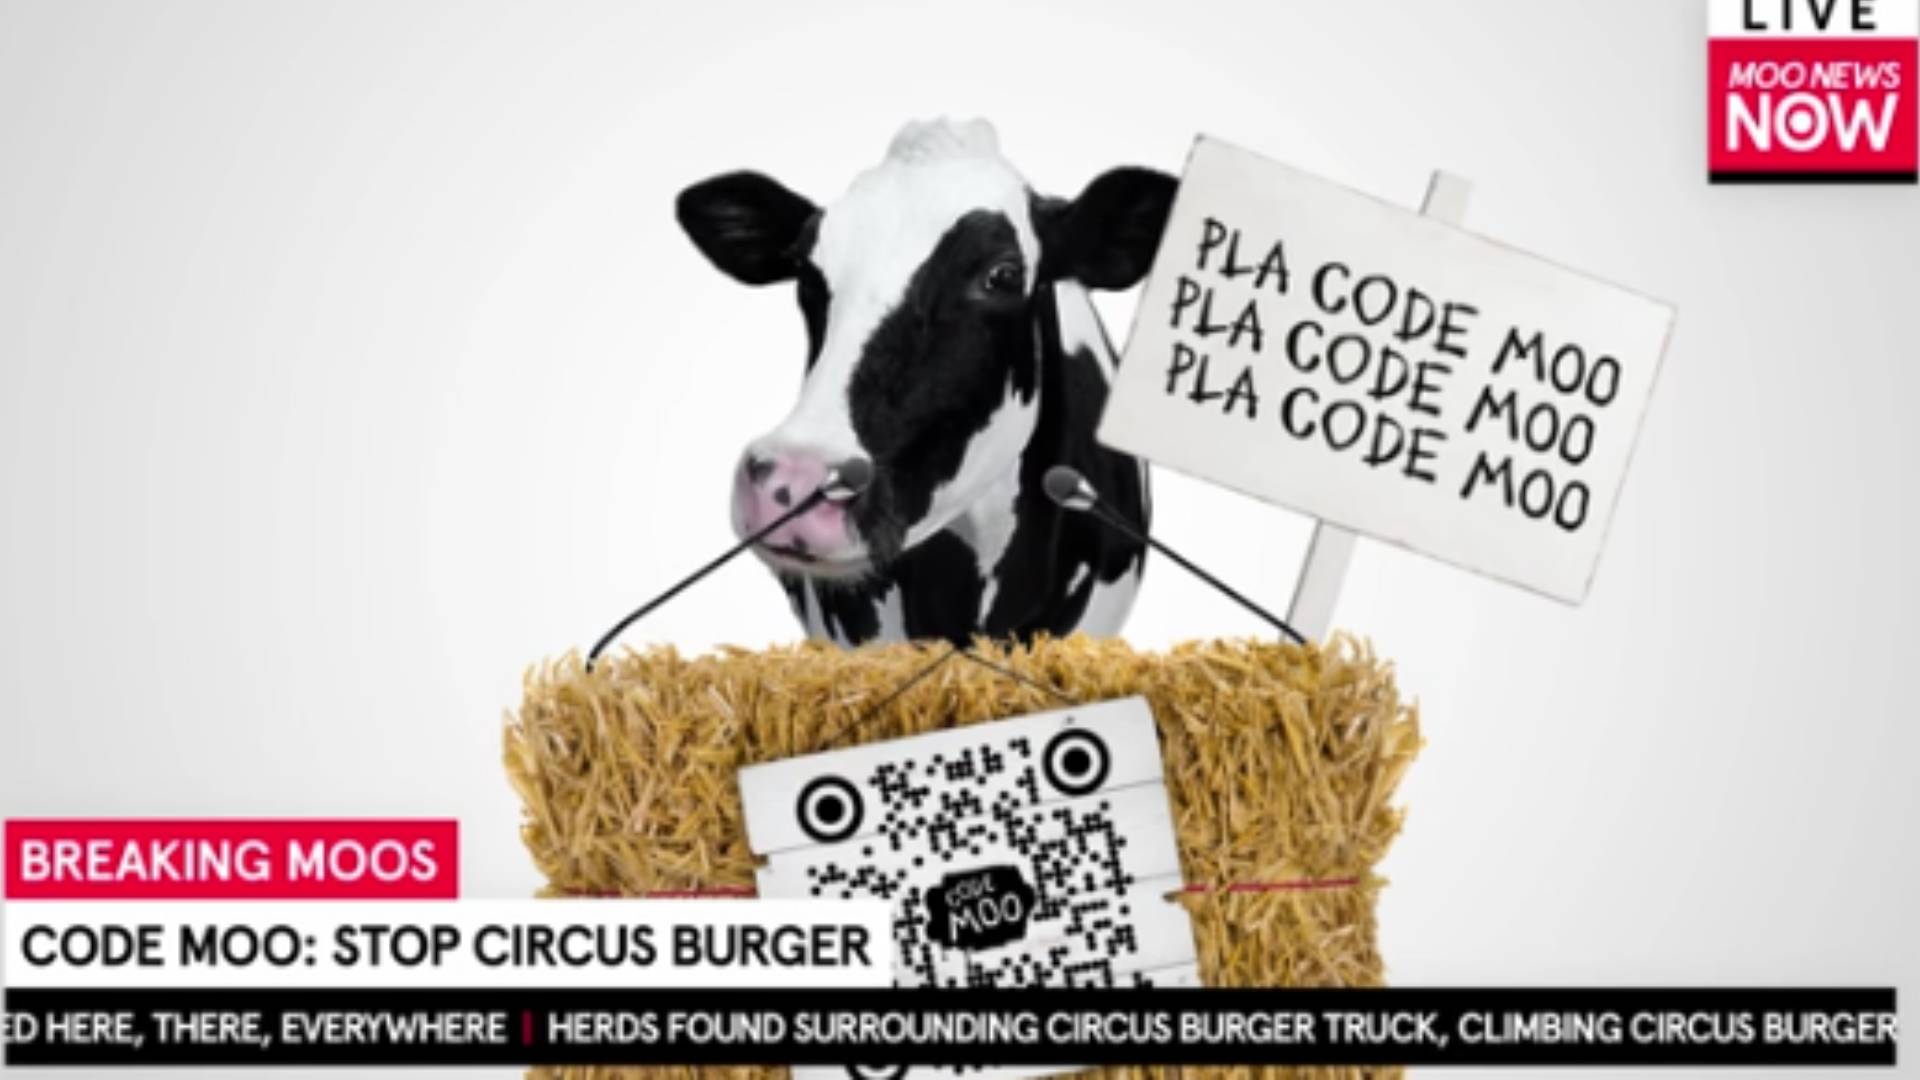 Play Video: The Chick-fil-A Cows are back for a summer of fun! Join the Cows’ ‘Code Moo’ mission through a digital game, animated short film, themed merchandise and more.